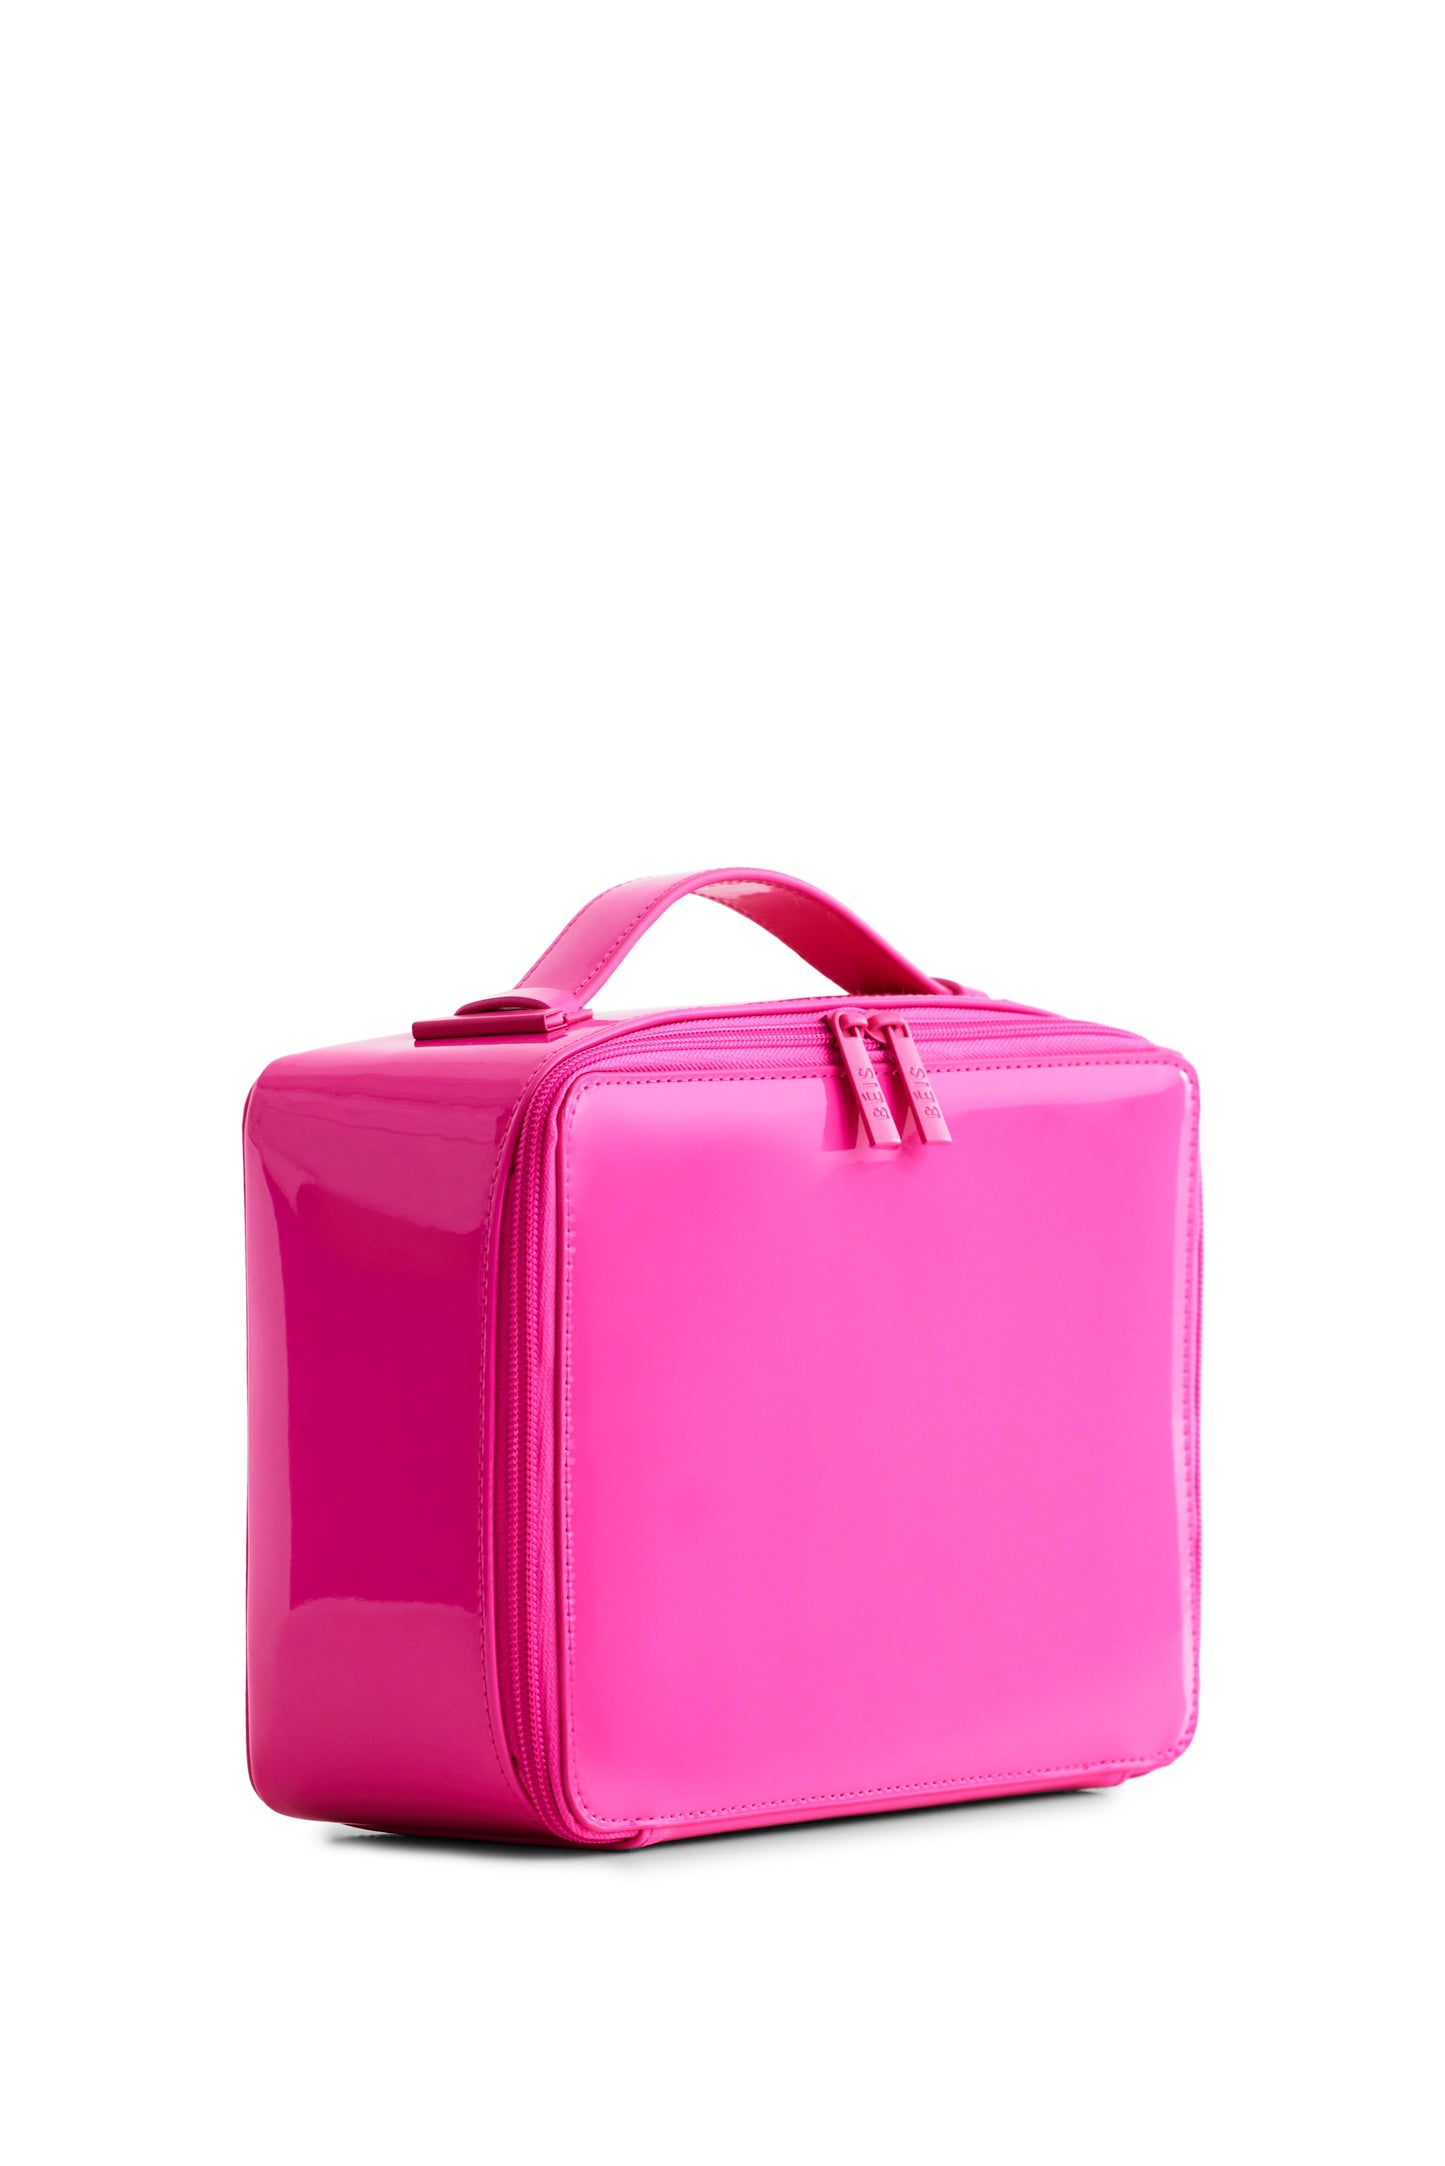 The Cosmetic Case in Barbie™ Pink